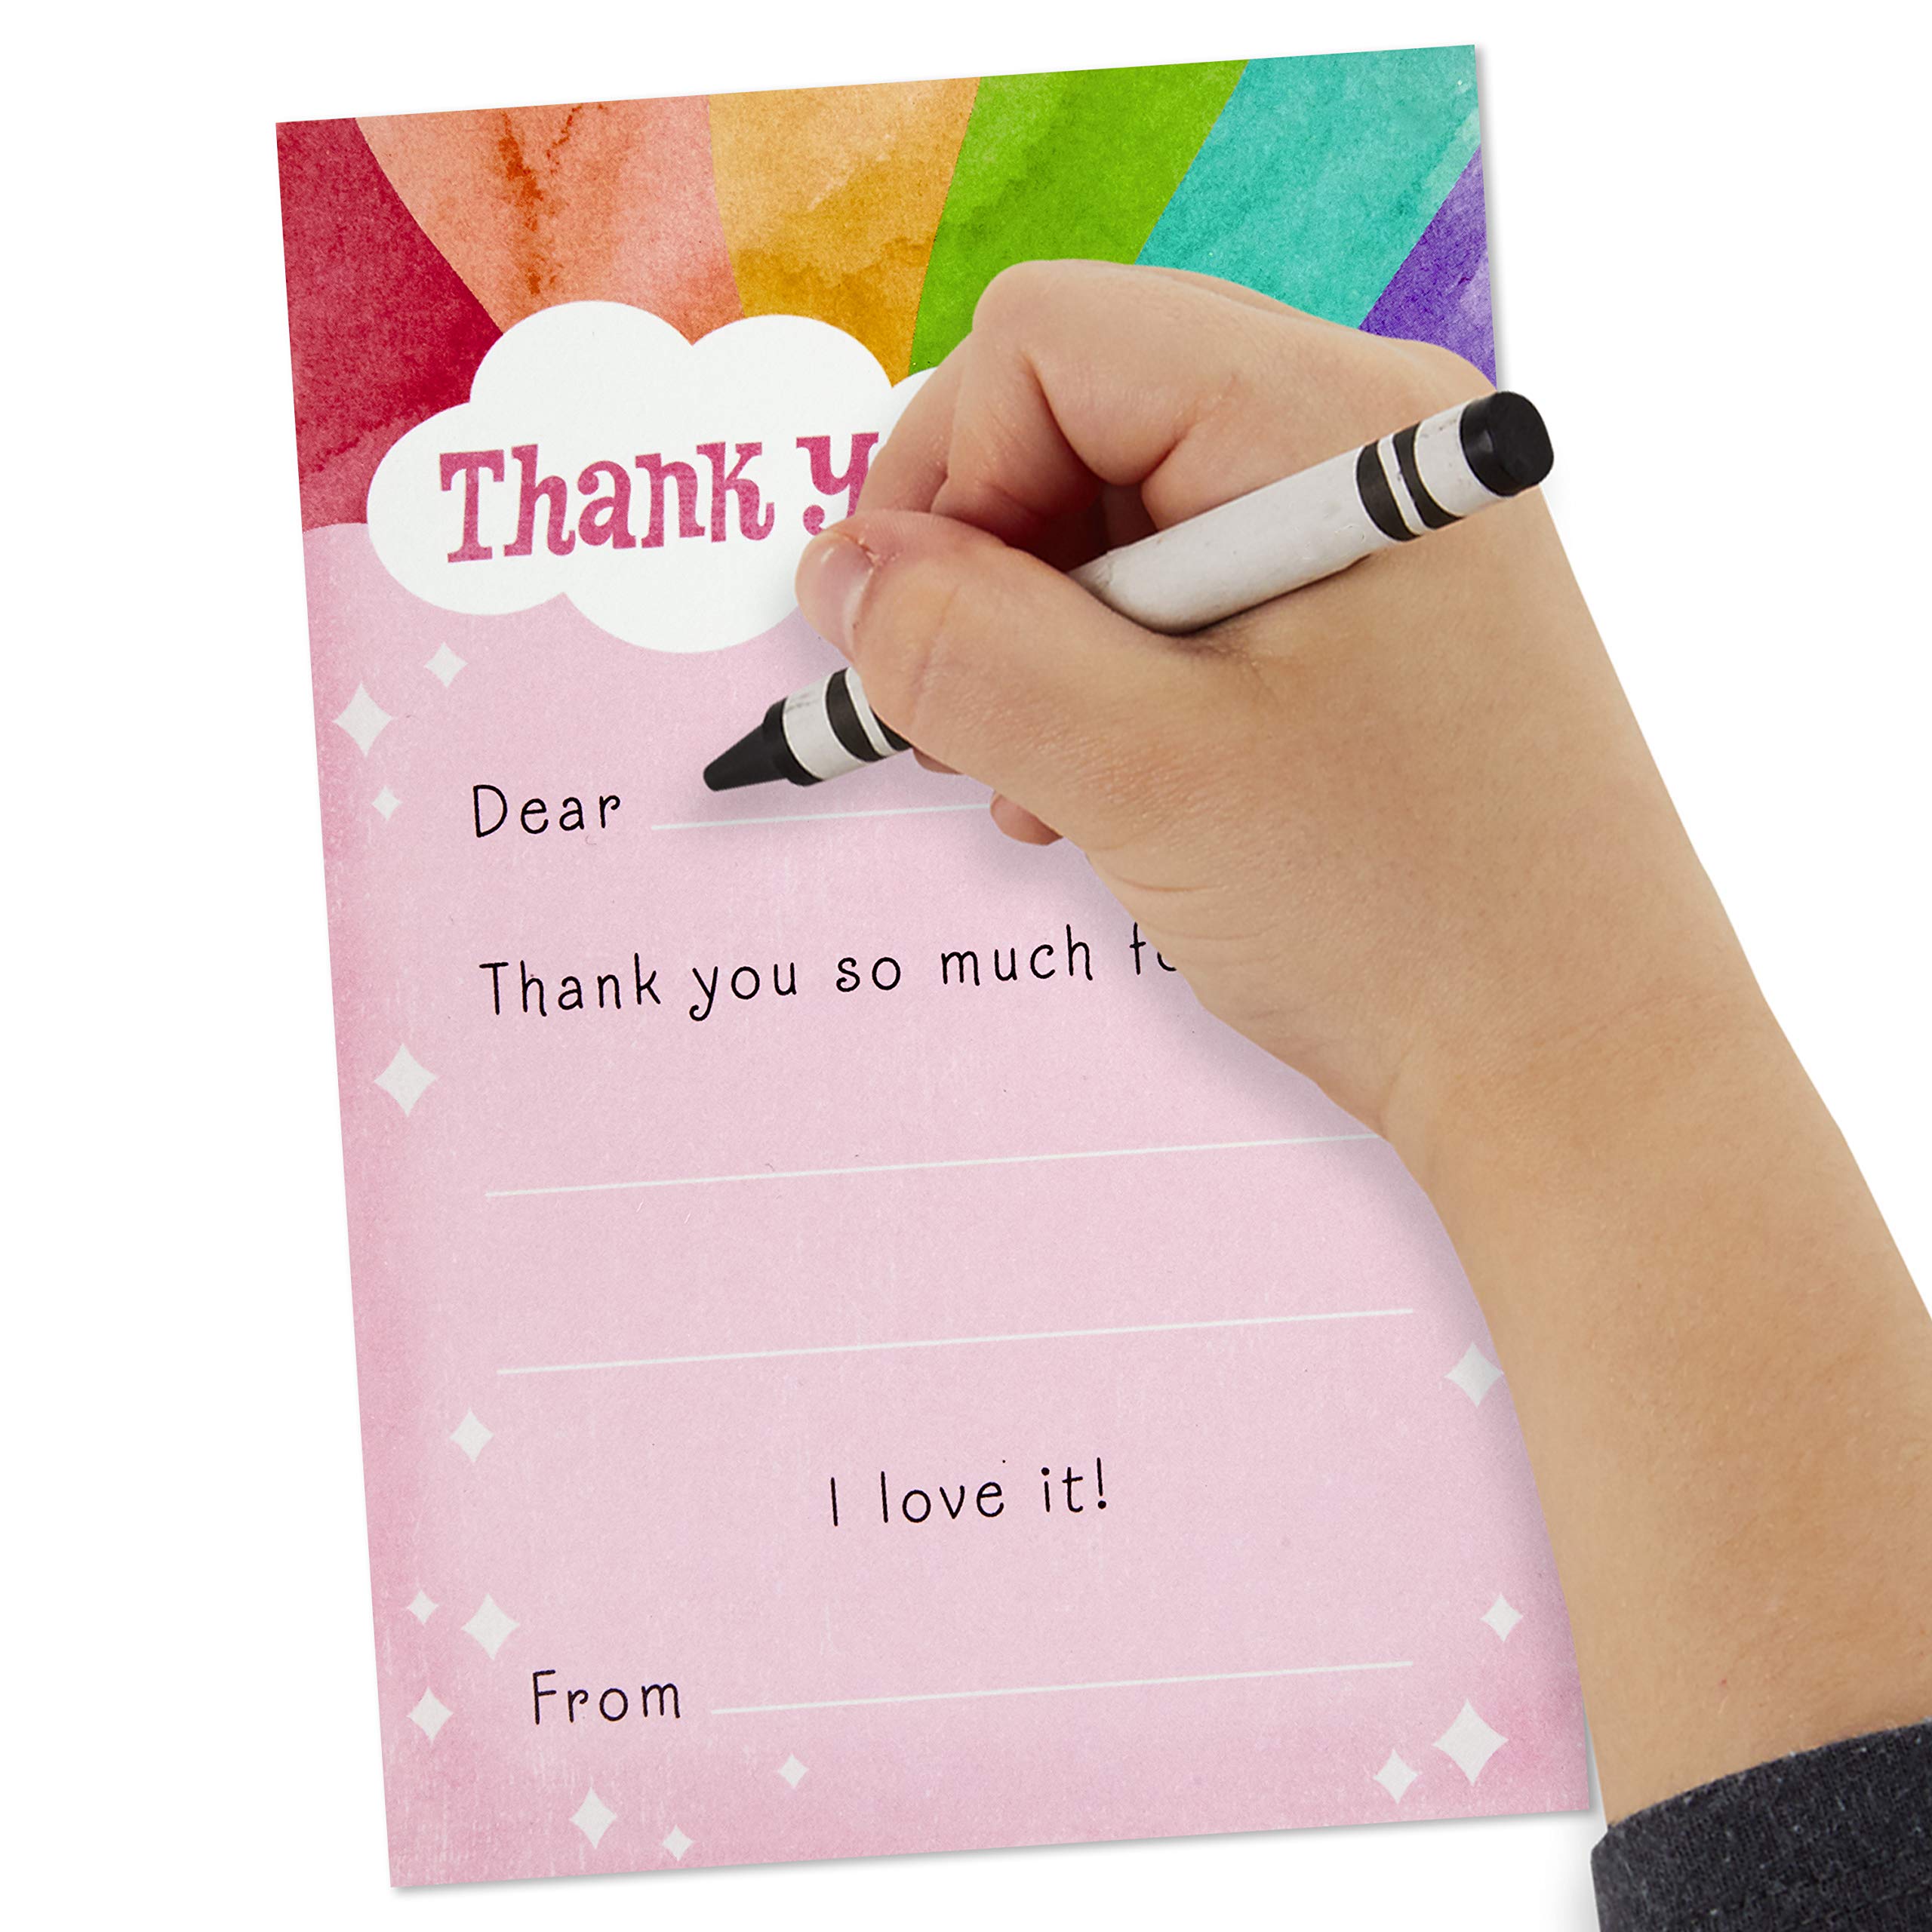 Hallmark Kids Fill in the Blank Thank You Cards, Rainbow (20 Cards with Envelopes)